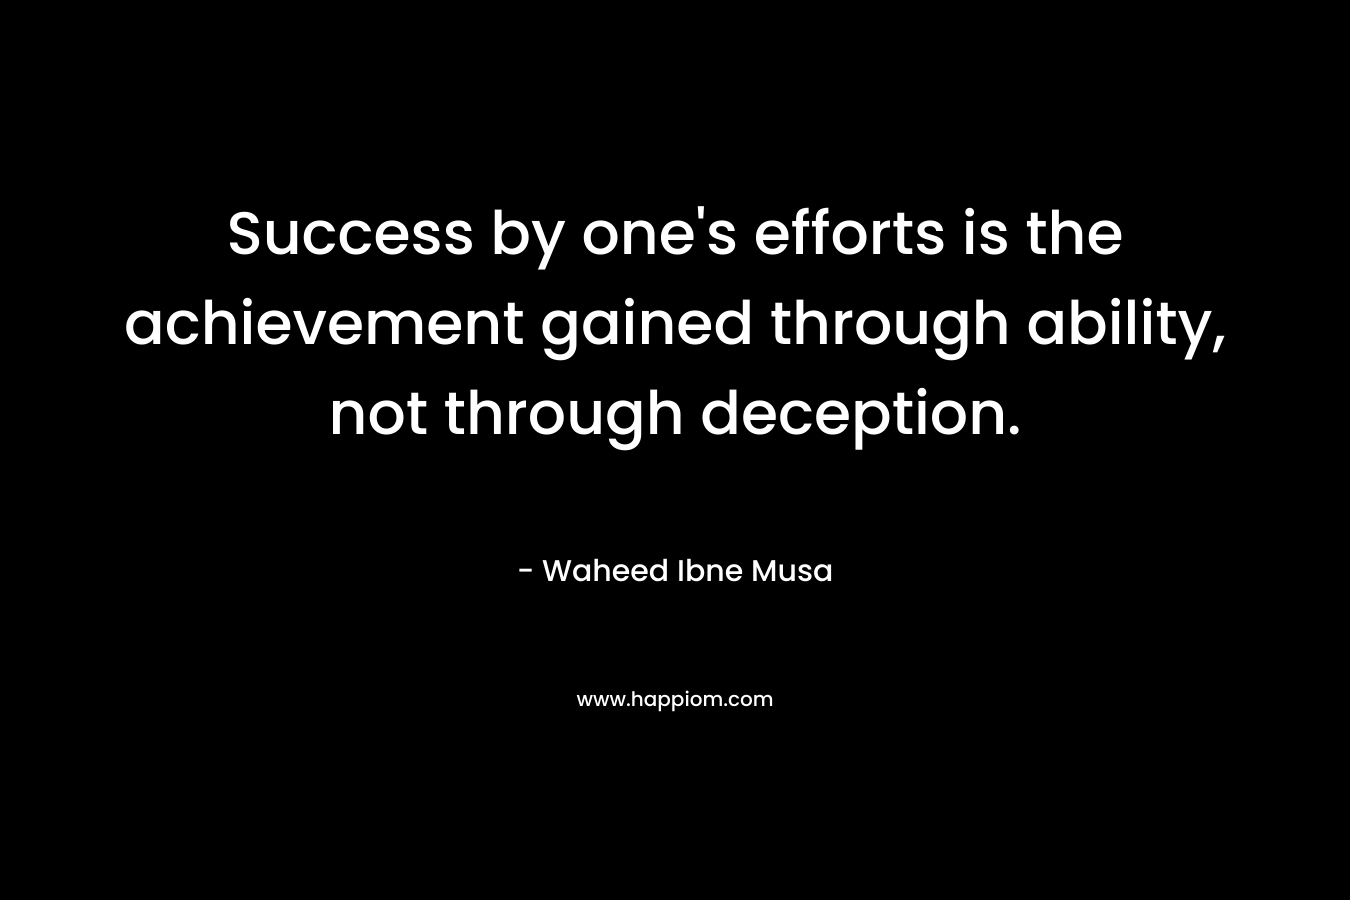 Success by one's efforts is the achievement gained through ability, not through deception.